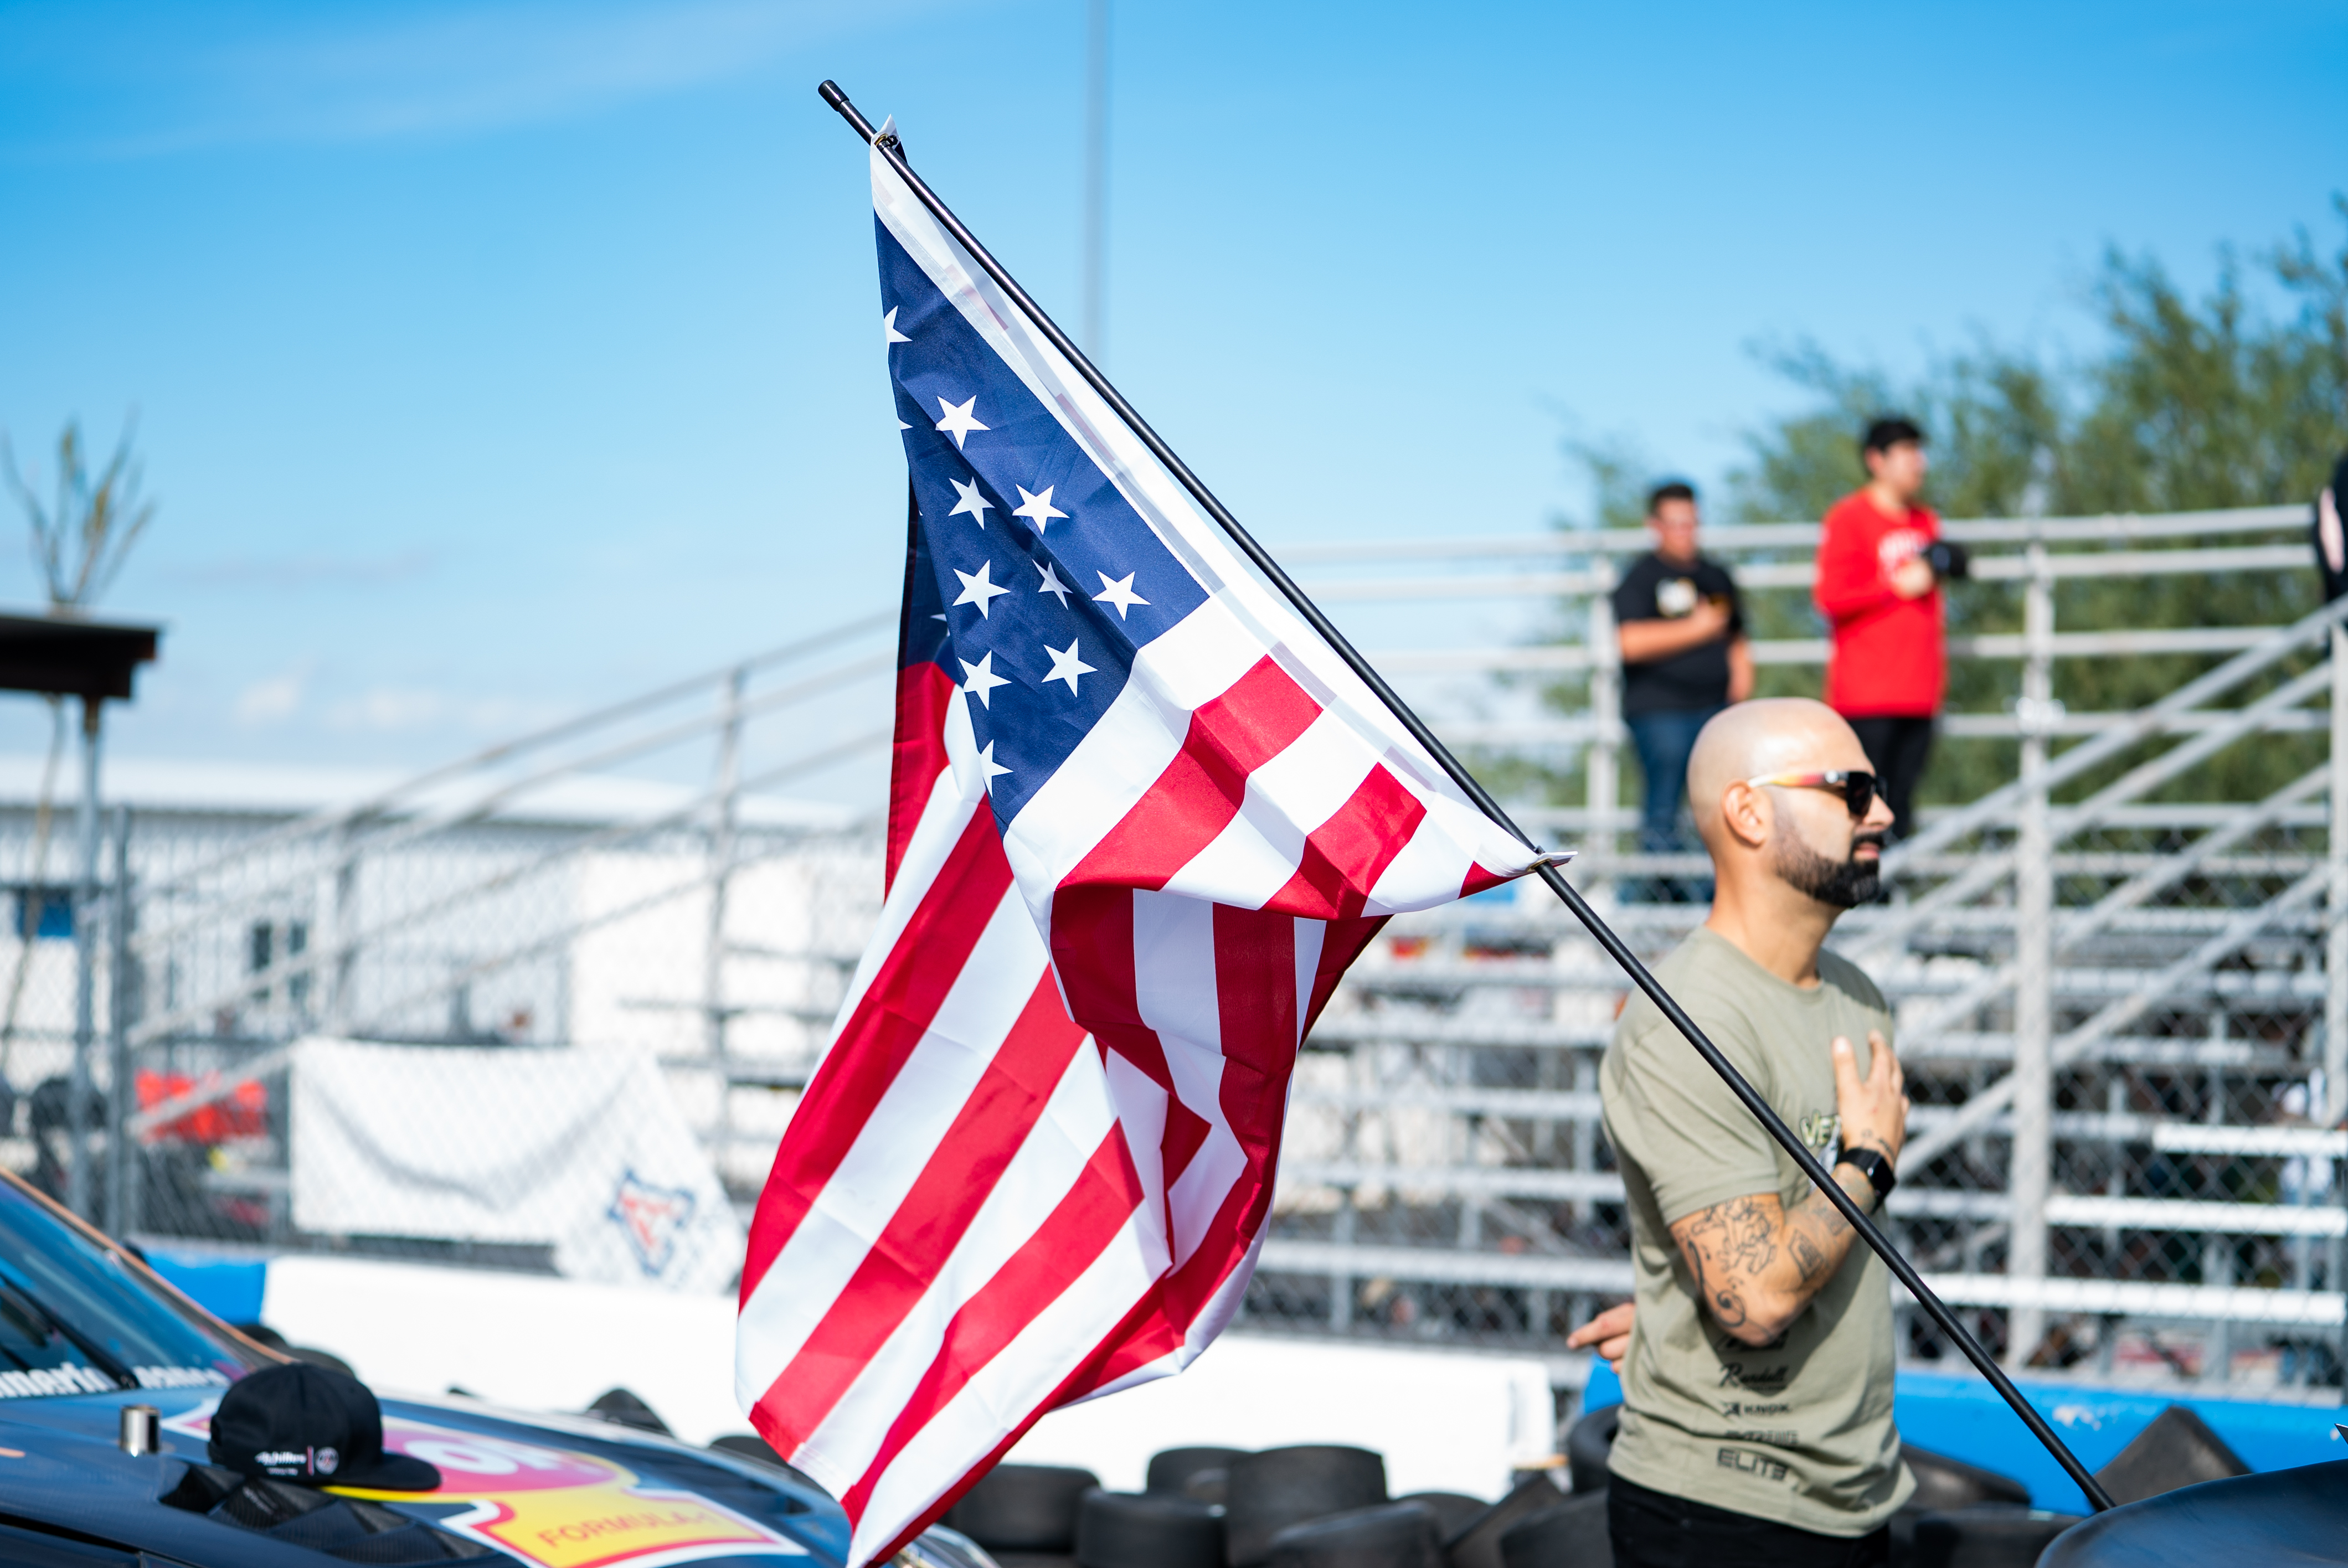 Drift drivers give veterans a healthy dose of adrenaline with ride alongs on track | Rebecca Nguyen photos